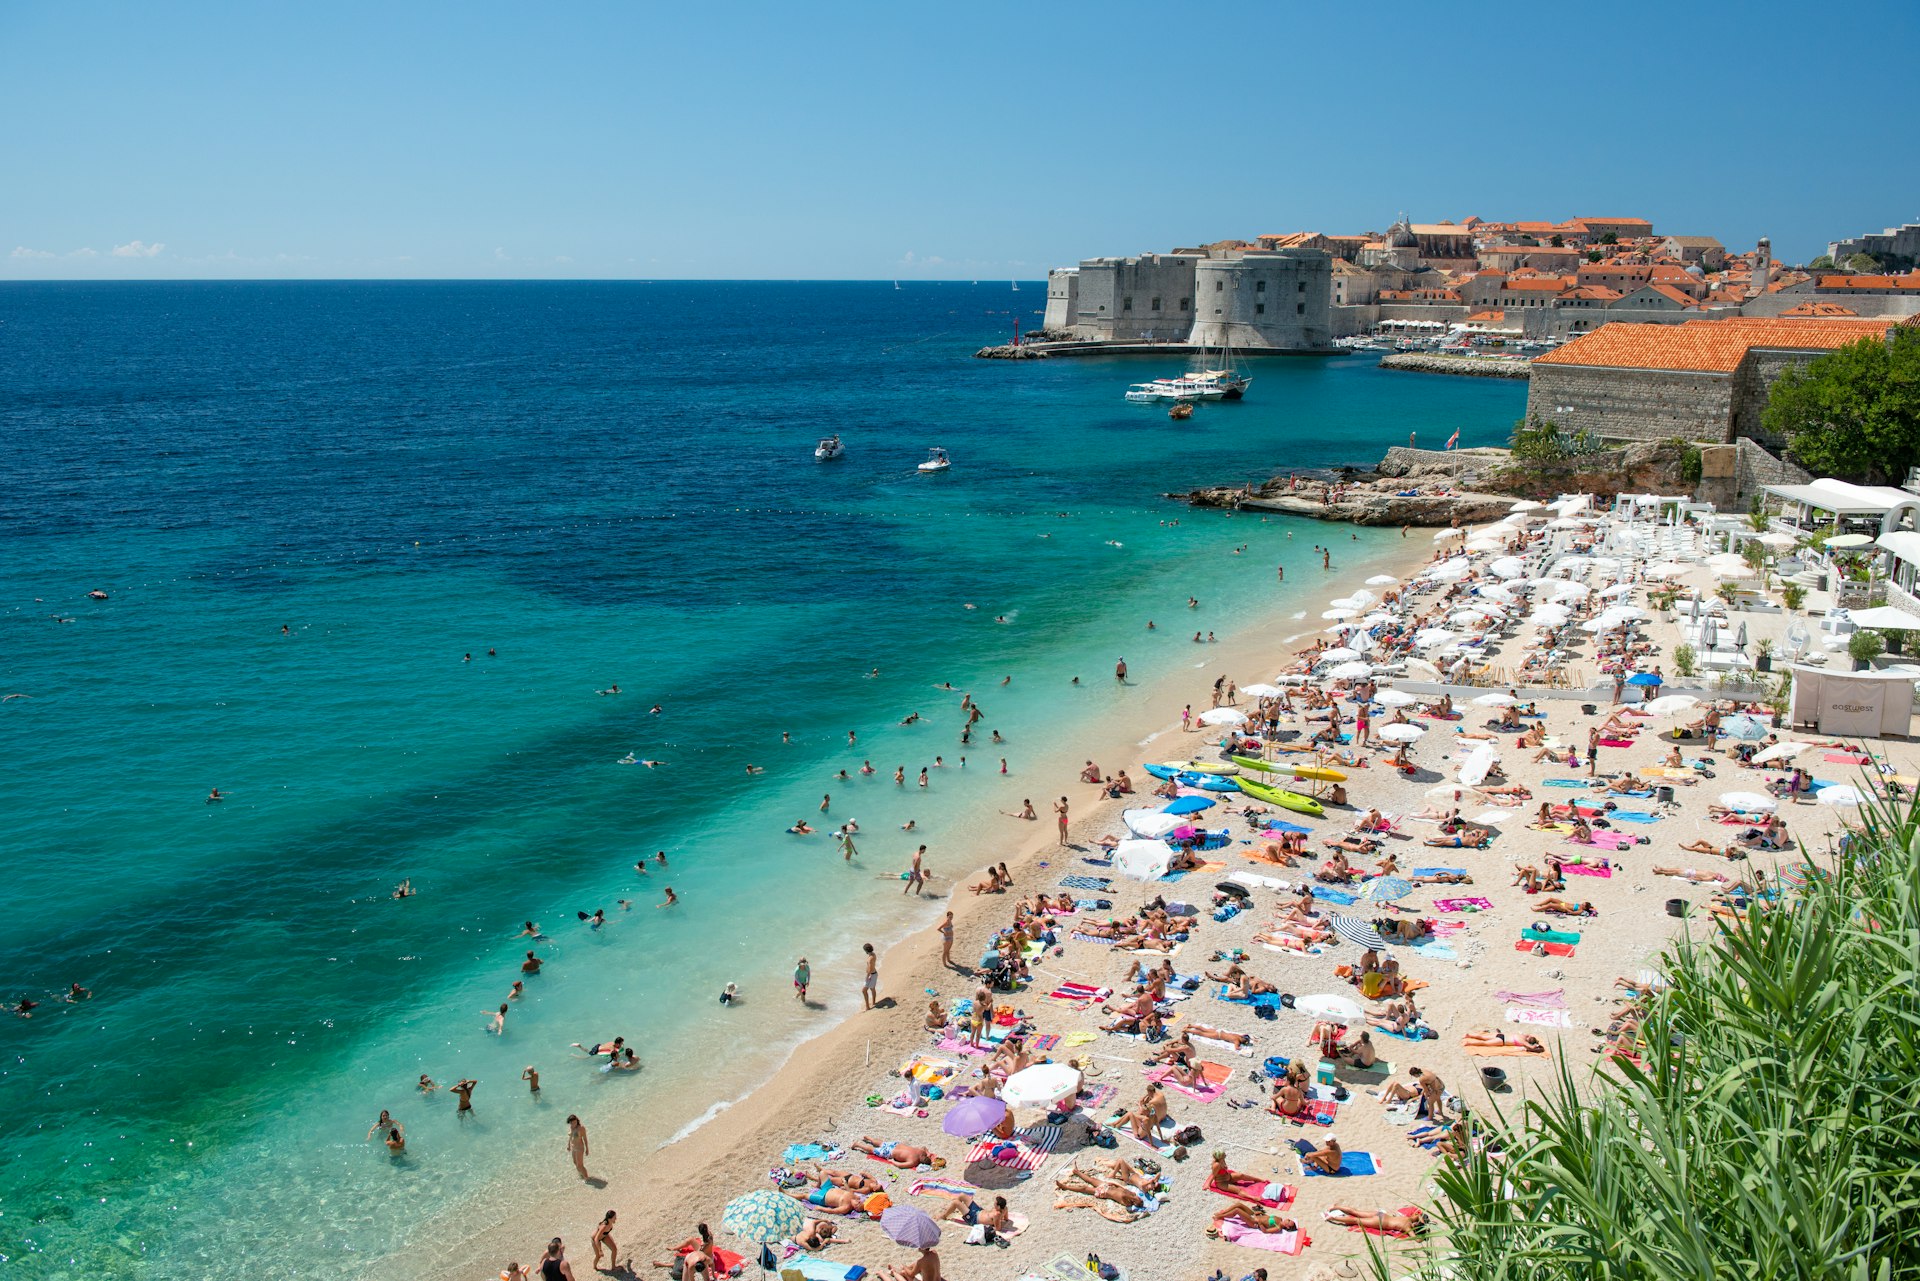 View of a packed beach with the Old Town Harbor in the background, Dubrovnik, Croatia